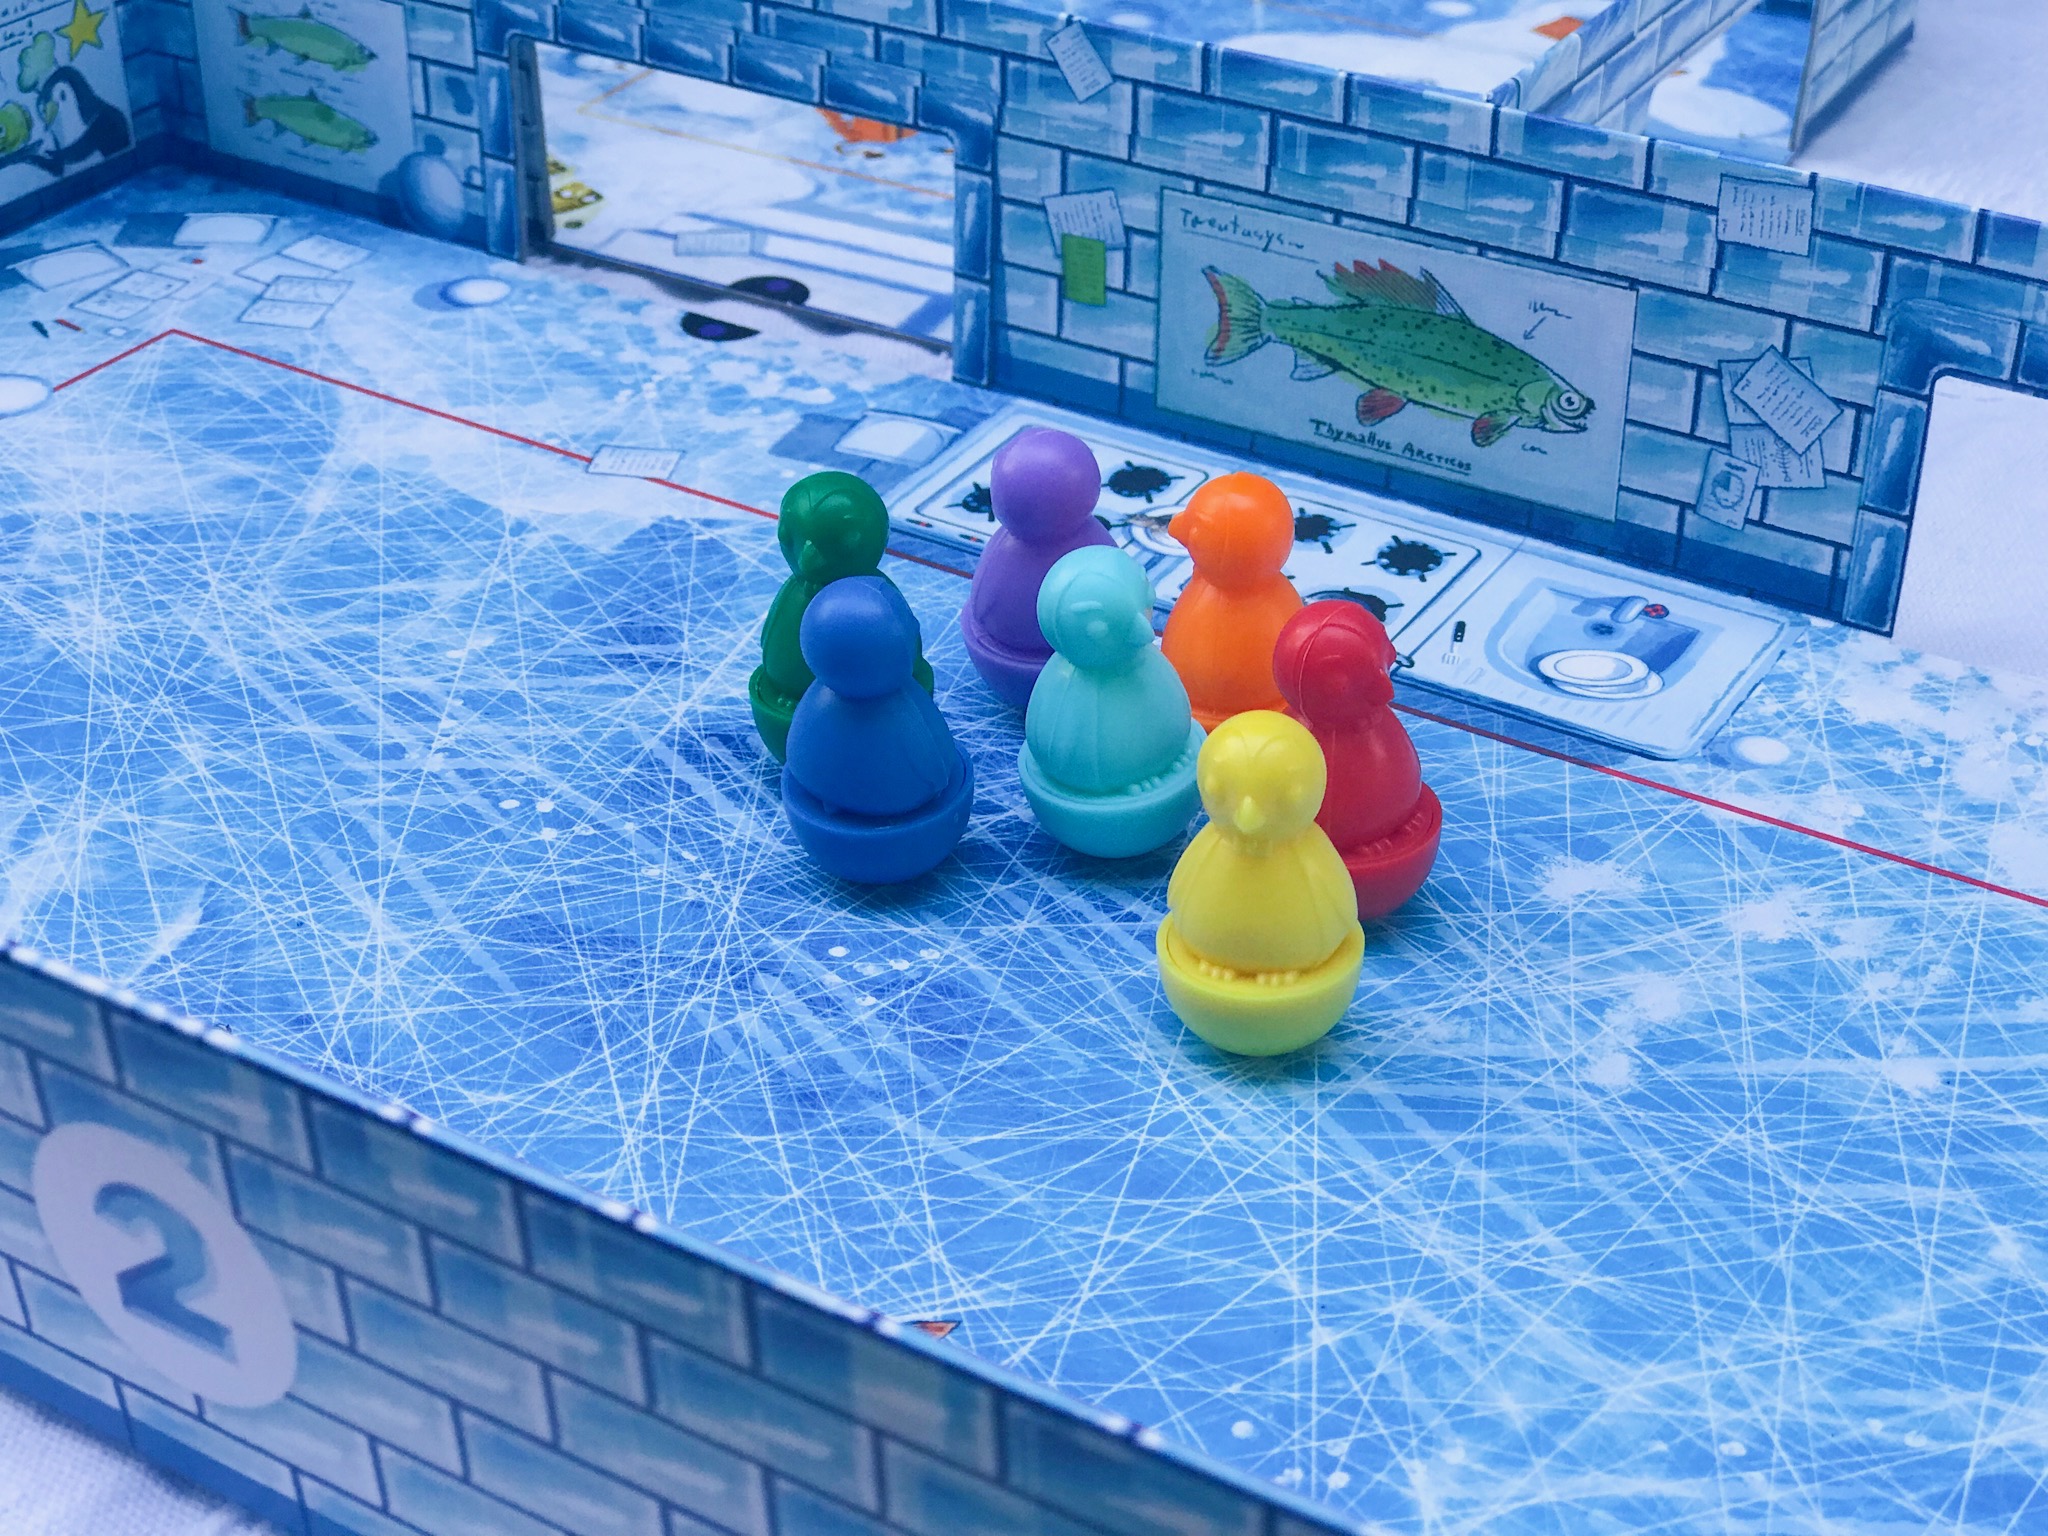 Ice Cool is so hot! - The Board Game Family